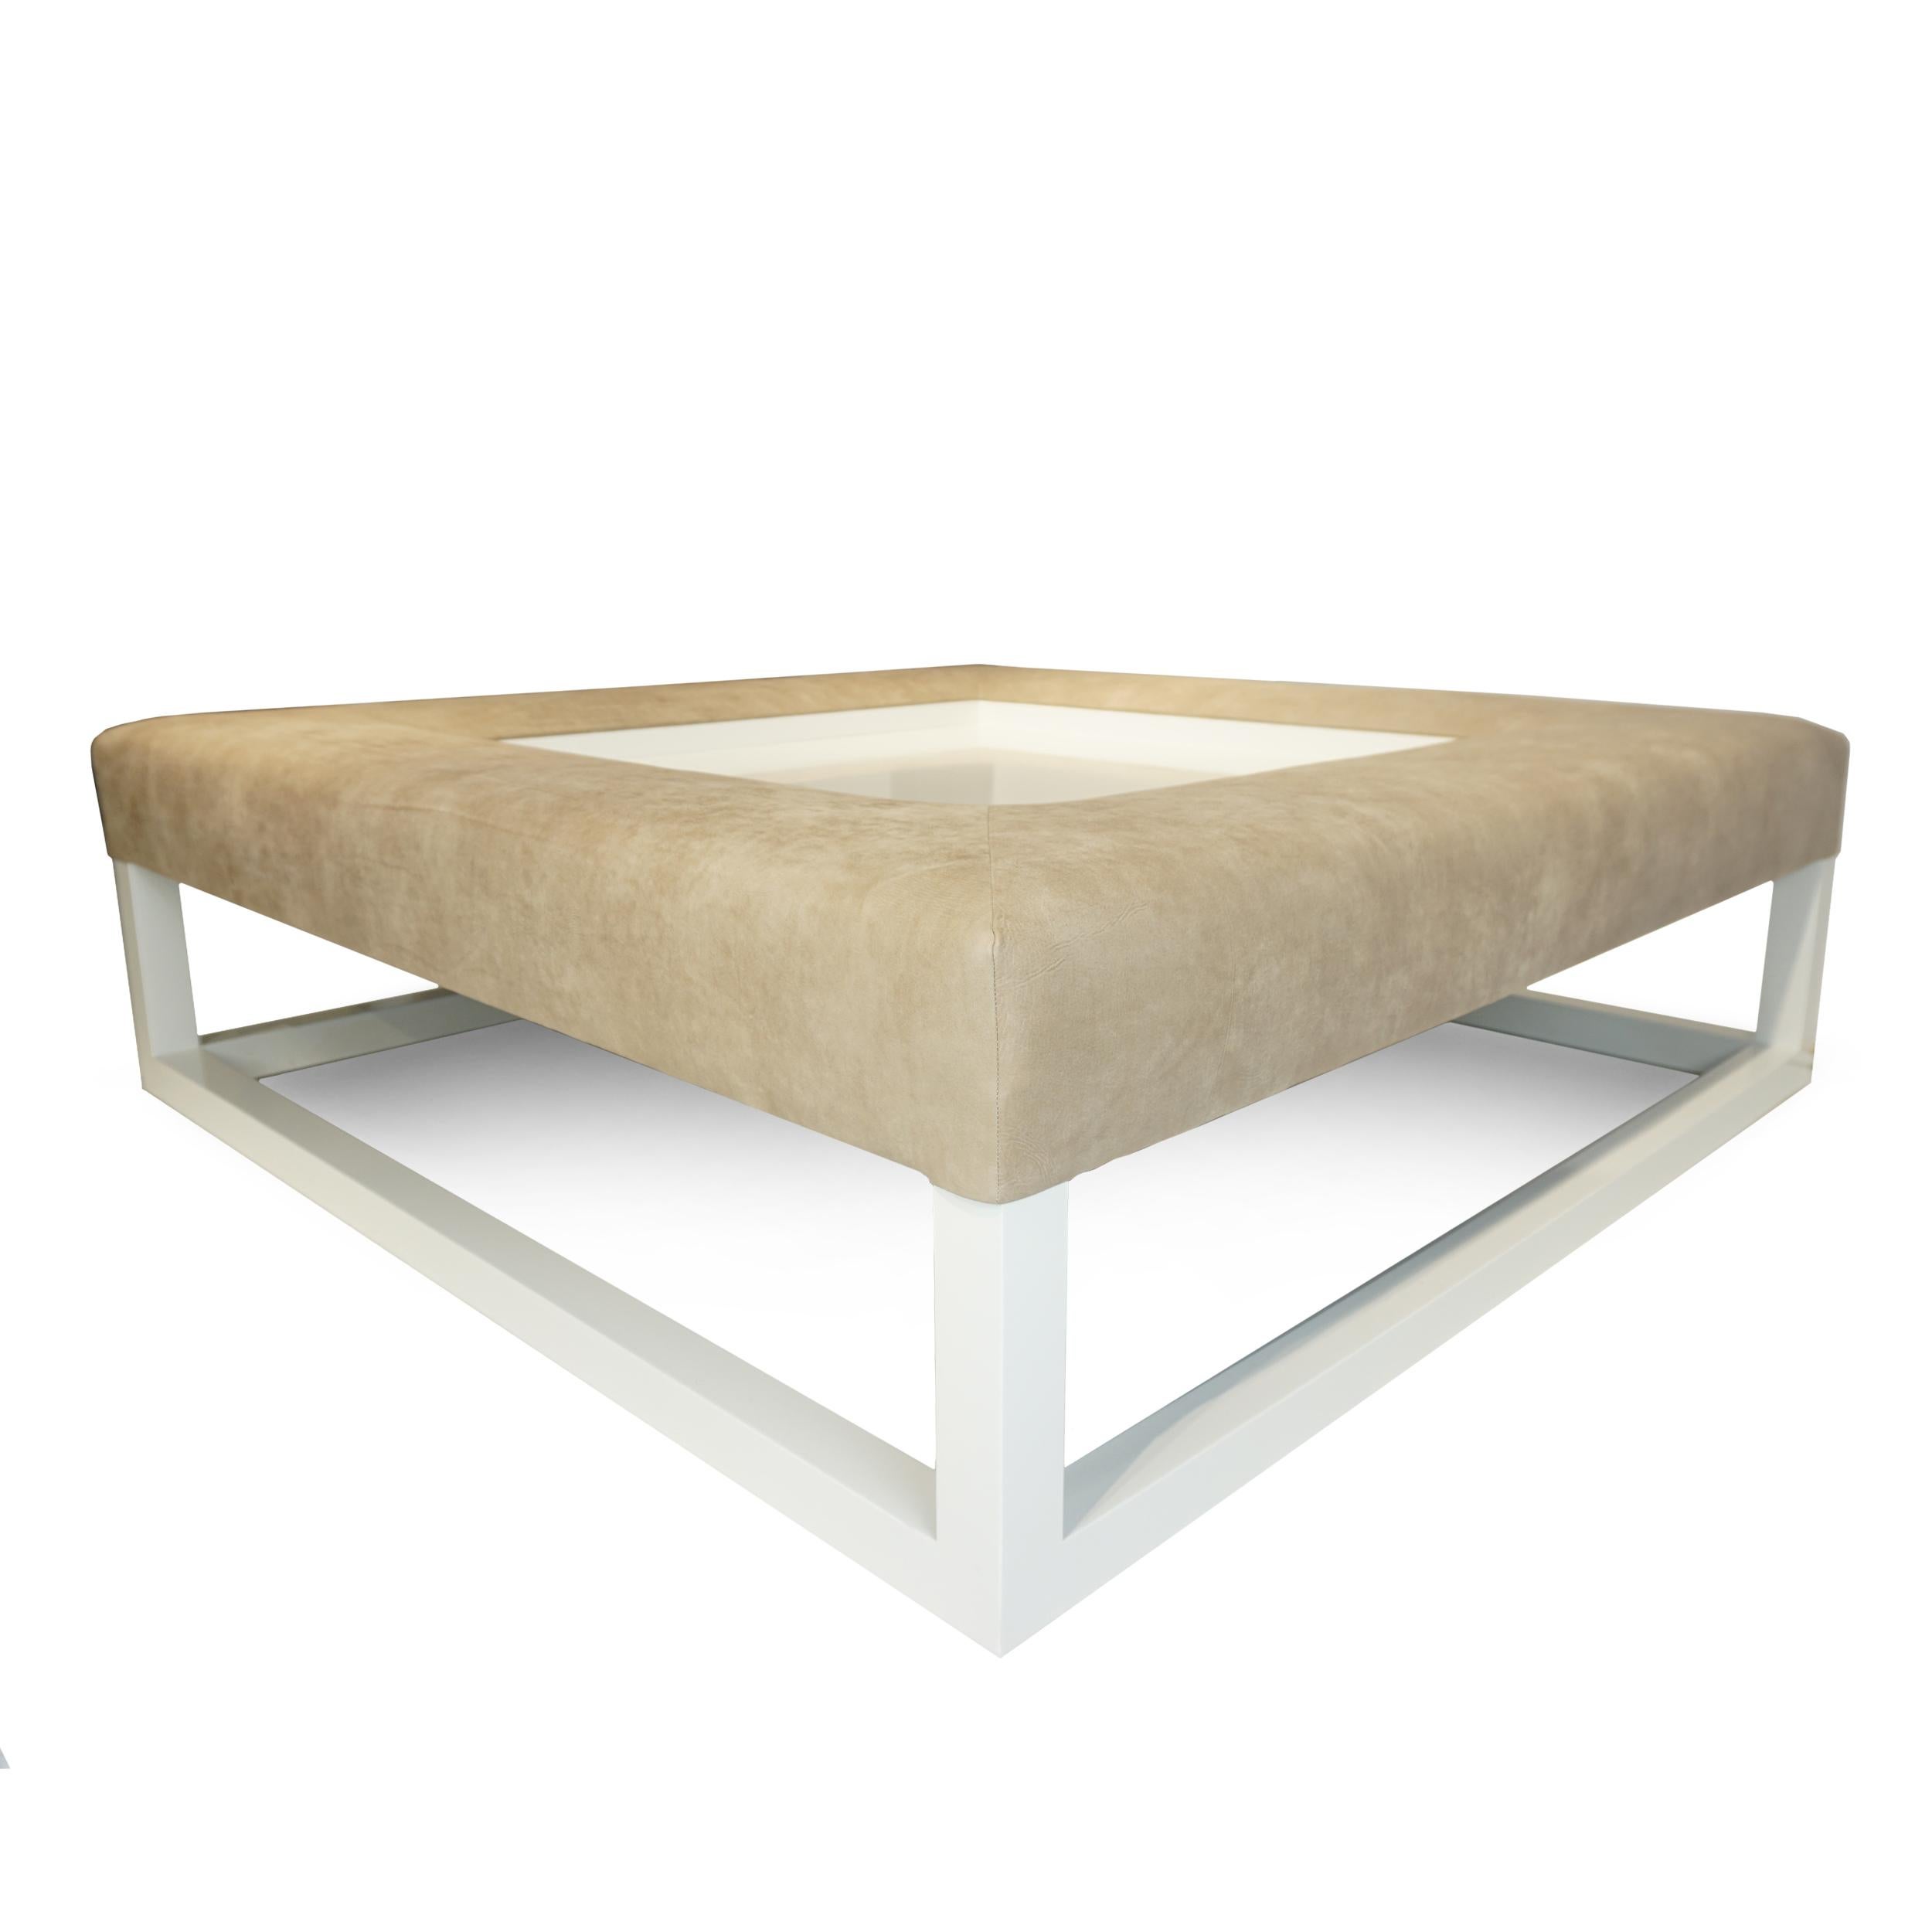 White lacquered solid hard maple 12-inch high frame topped with deep soft Italian leather upholstered bumper that is 6.5-inches high by 12- inches deep surrounds a 36” x 36” recessed white lacquered stationary tray. Fully customizable in size, wood